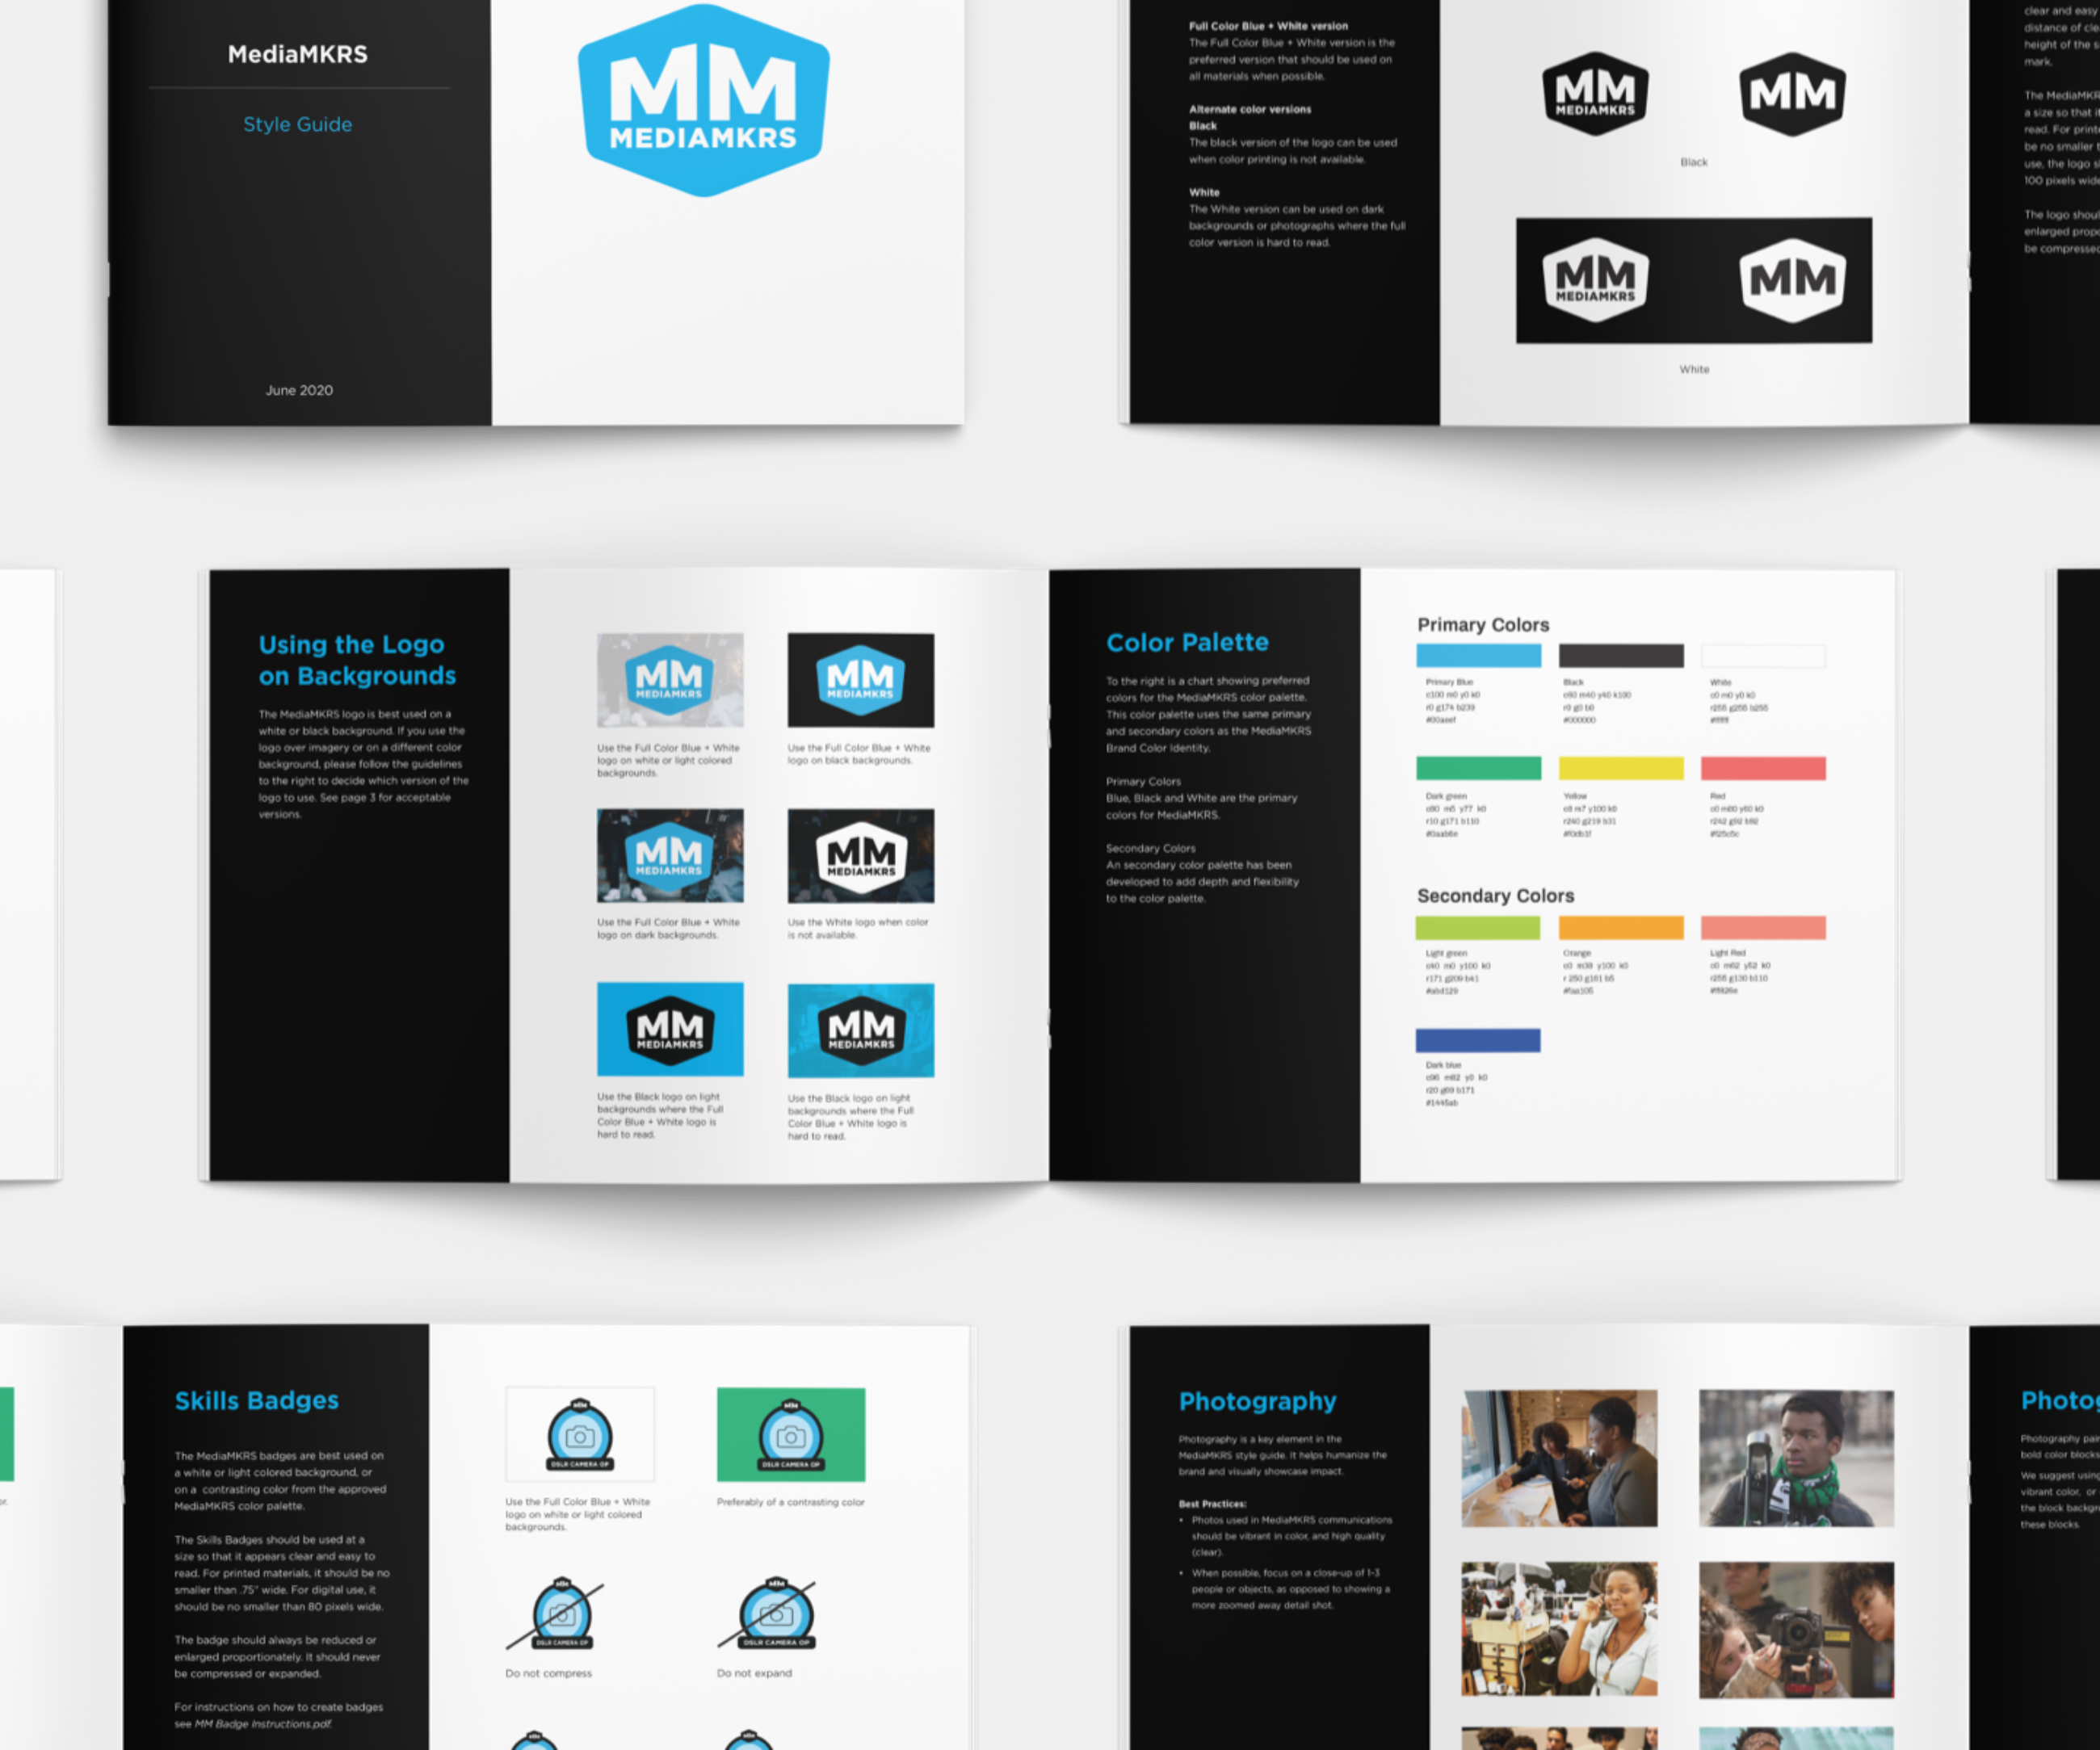 A style guide created for MediaMKRS as part of their nonprofit branding effort. It showcases the logo in different formats and brand colors, imagery, fonts, and more.